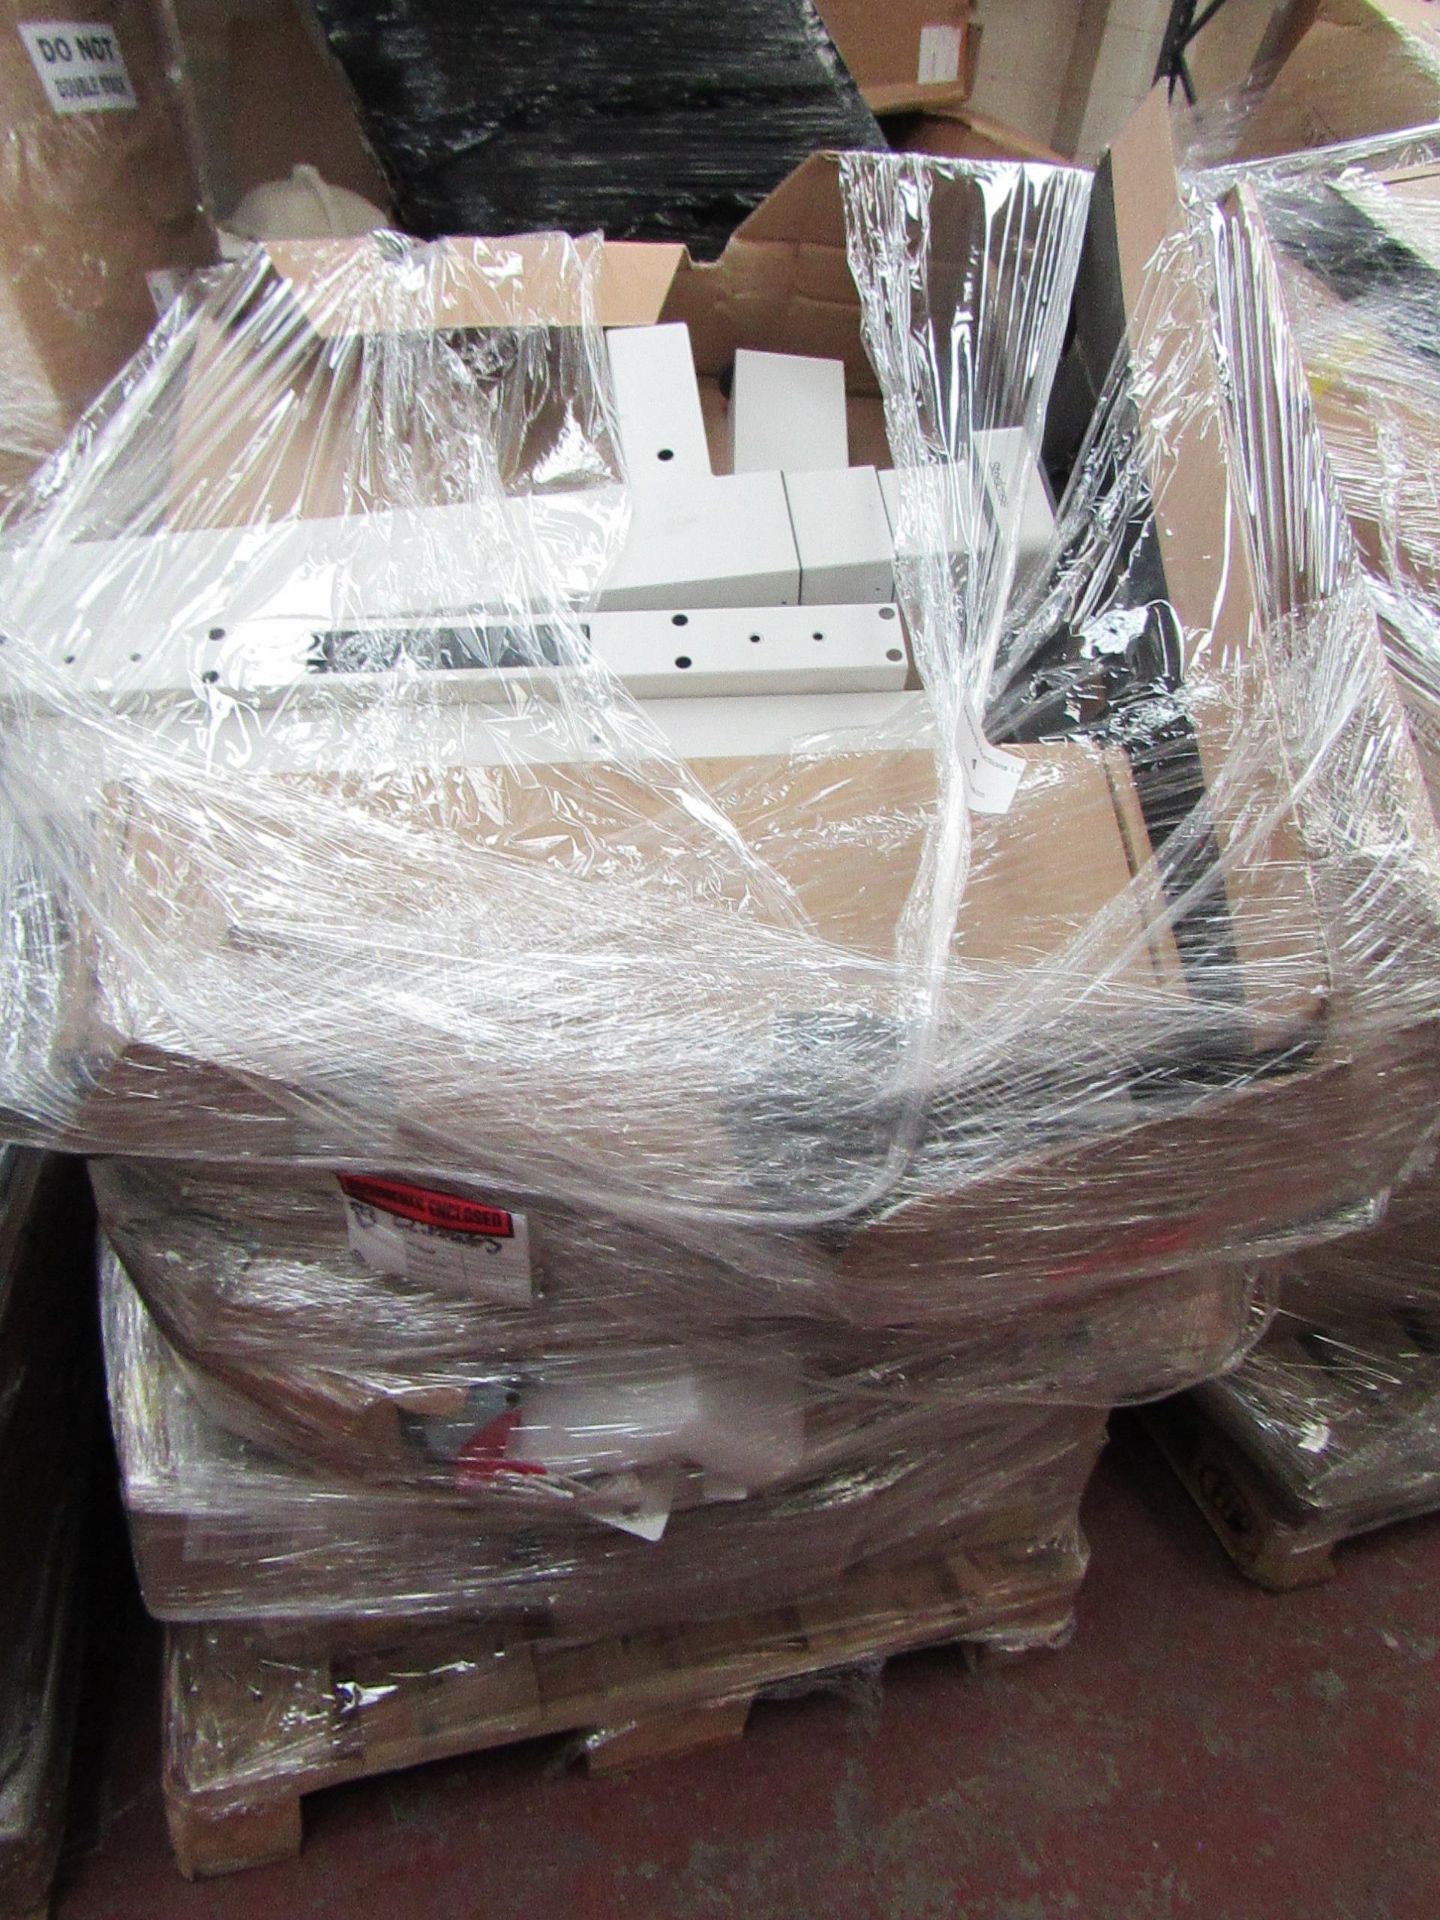 | 1X | PALLET OF WHAT LOOKS TO BE STEEL CASE ADJUST ABLE OFFICE DESKS PARTS, UNMANIFESTED, WE HAVE